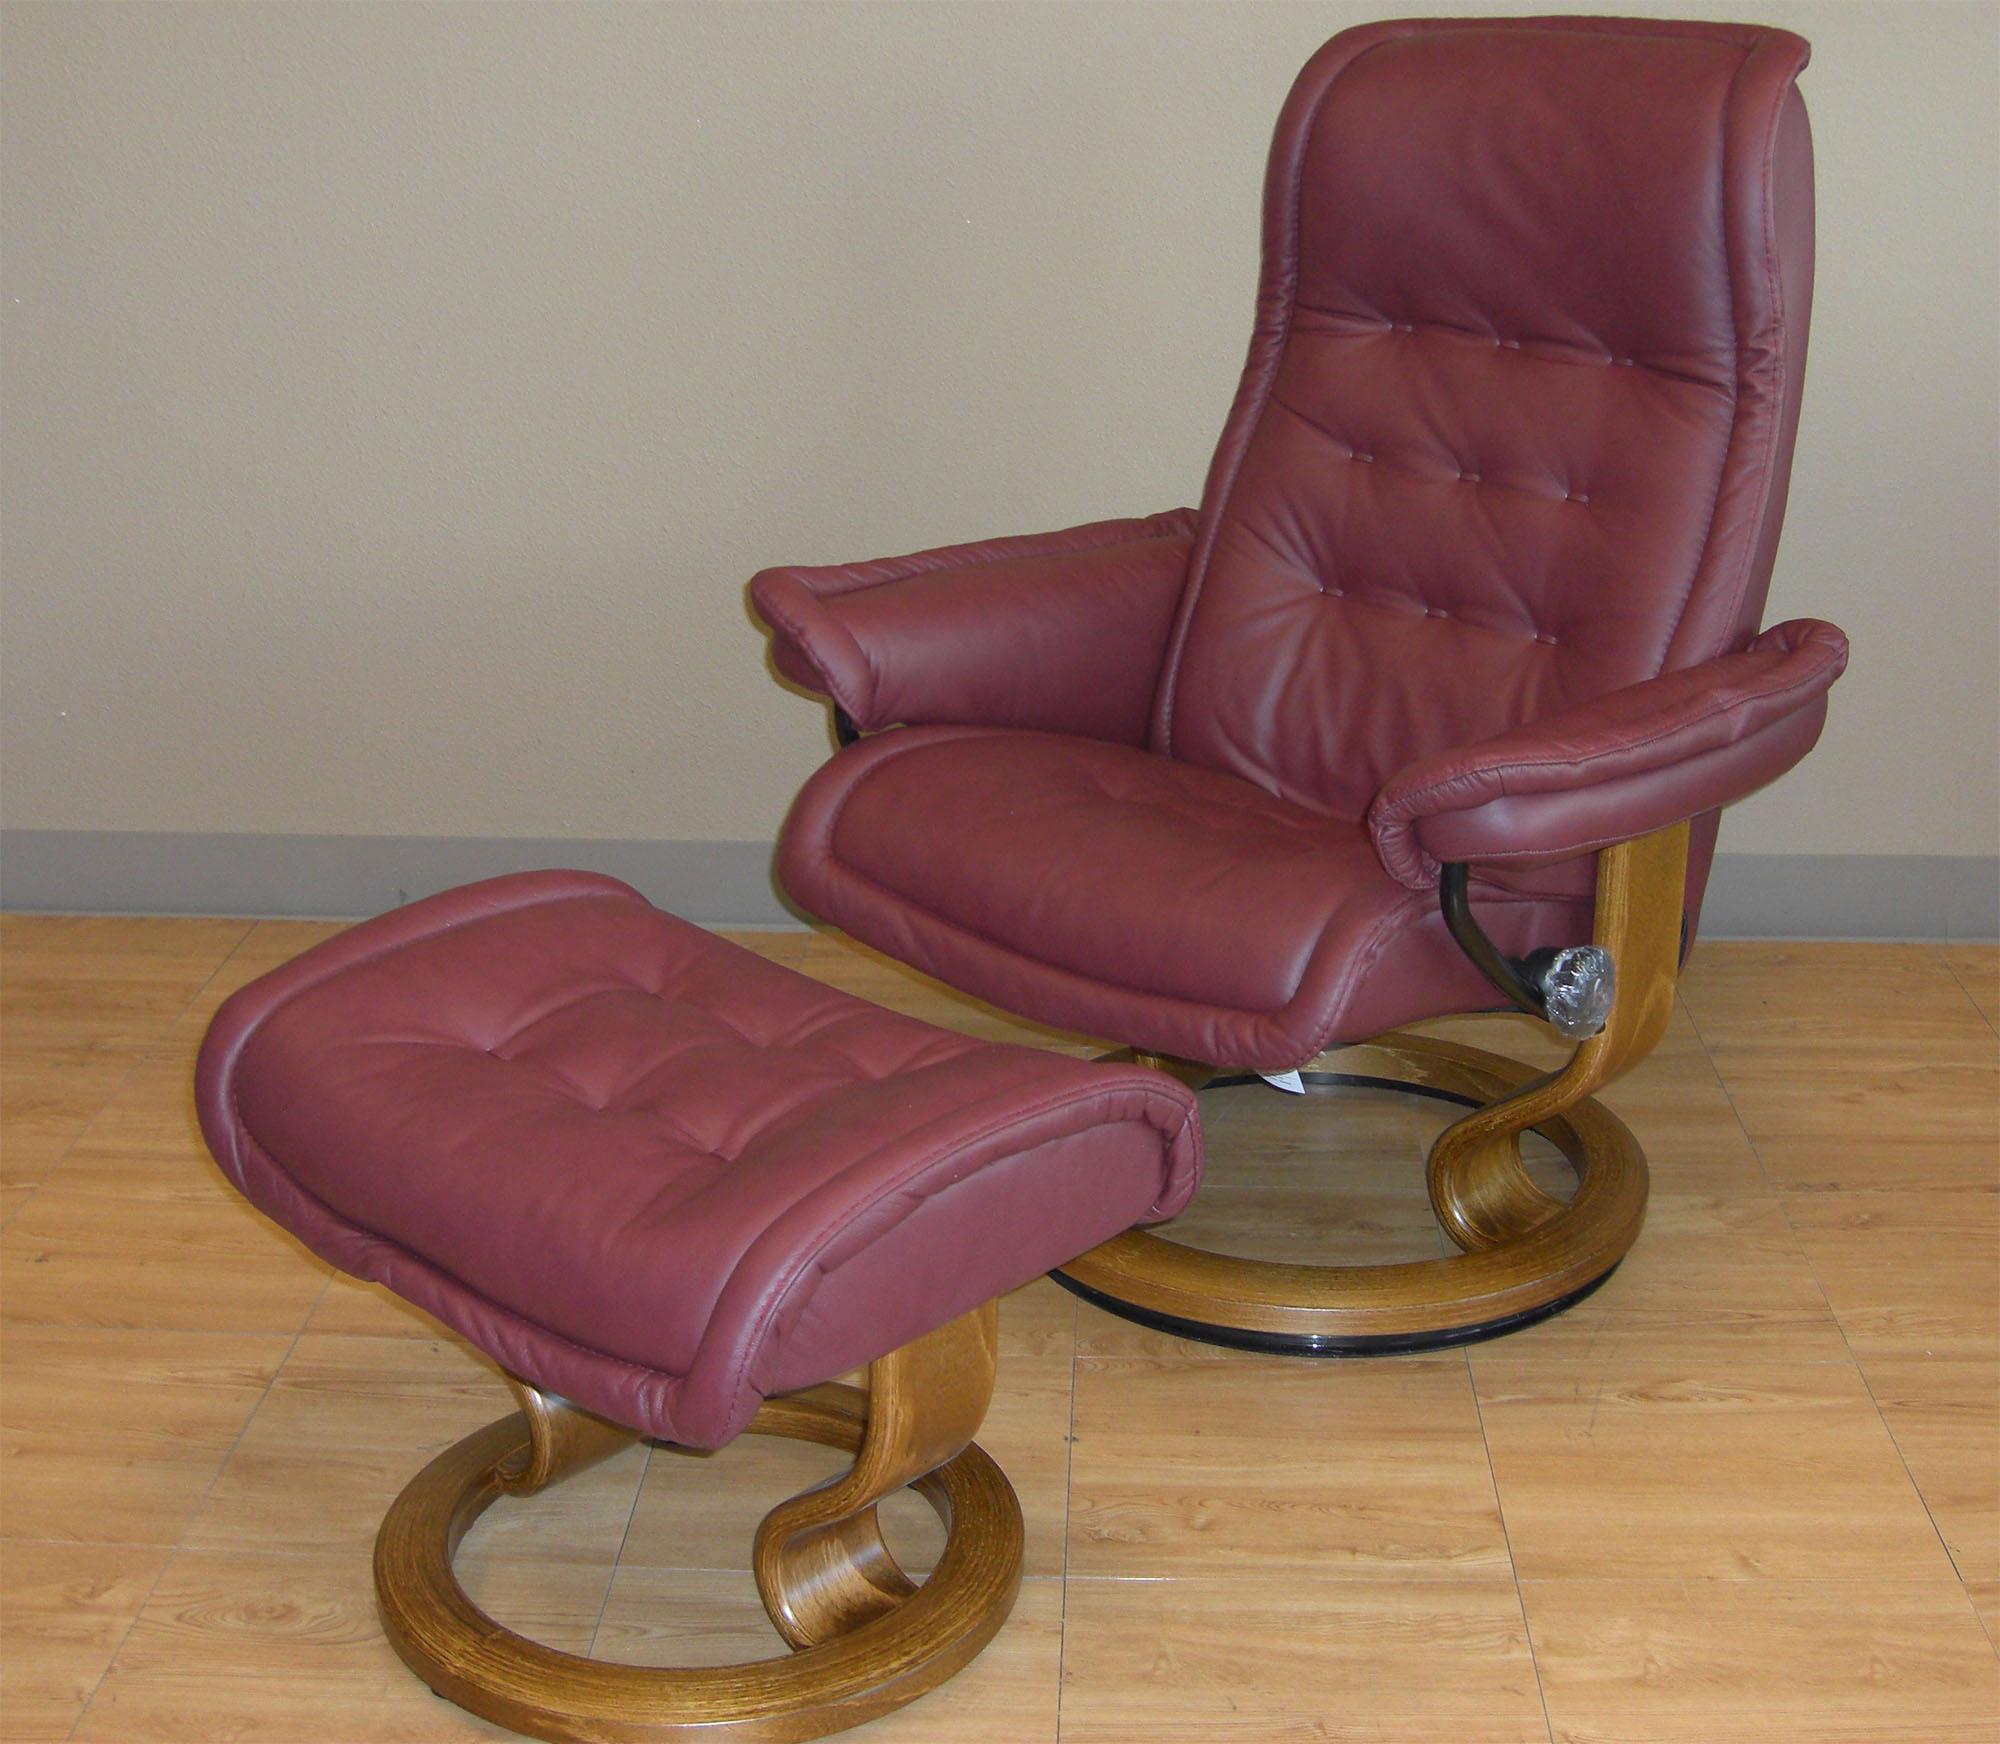 Stressless Paloma New Winered Leather Color Recliner Chair and Ottoman from Ekornes